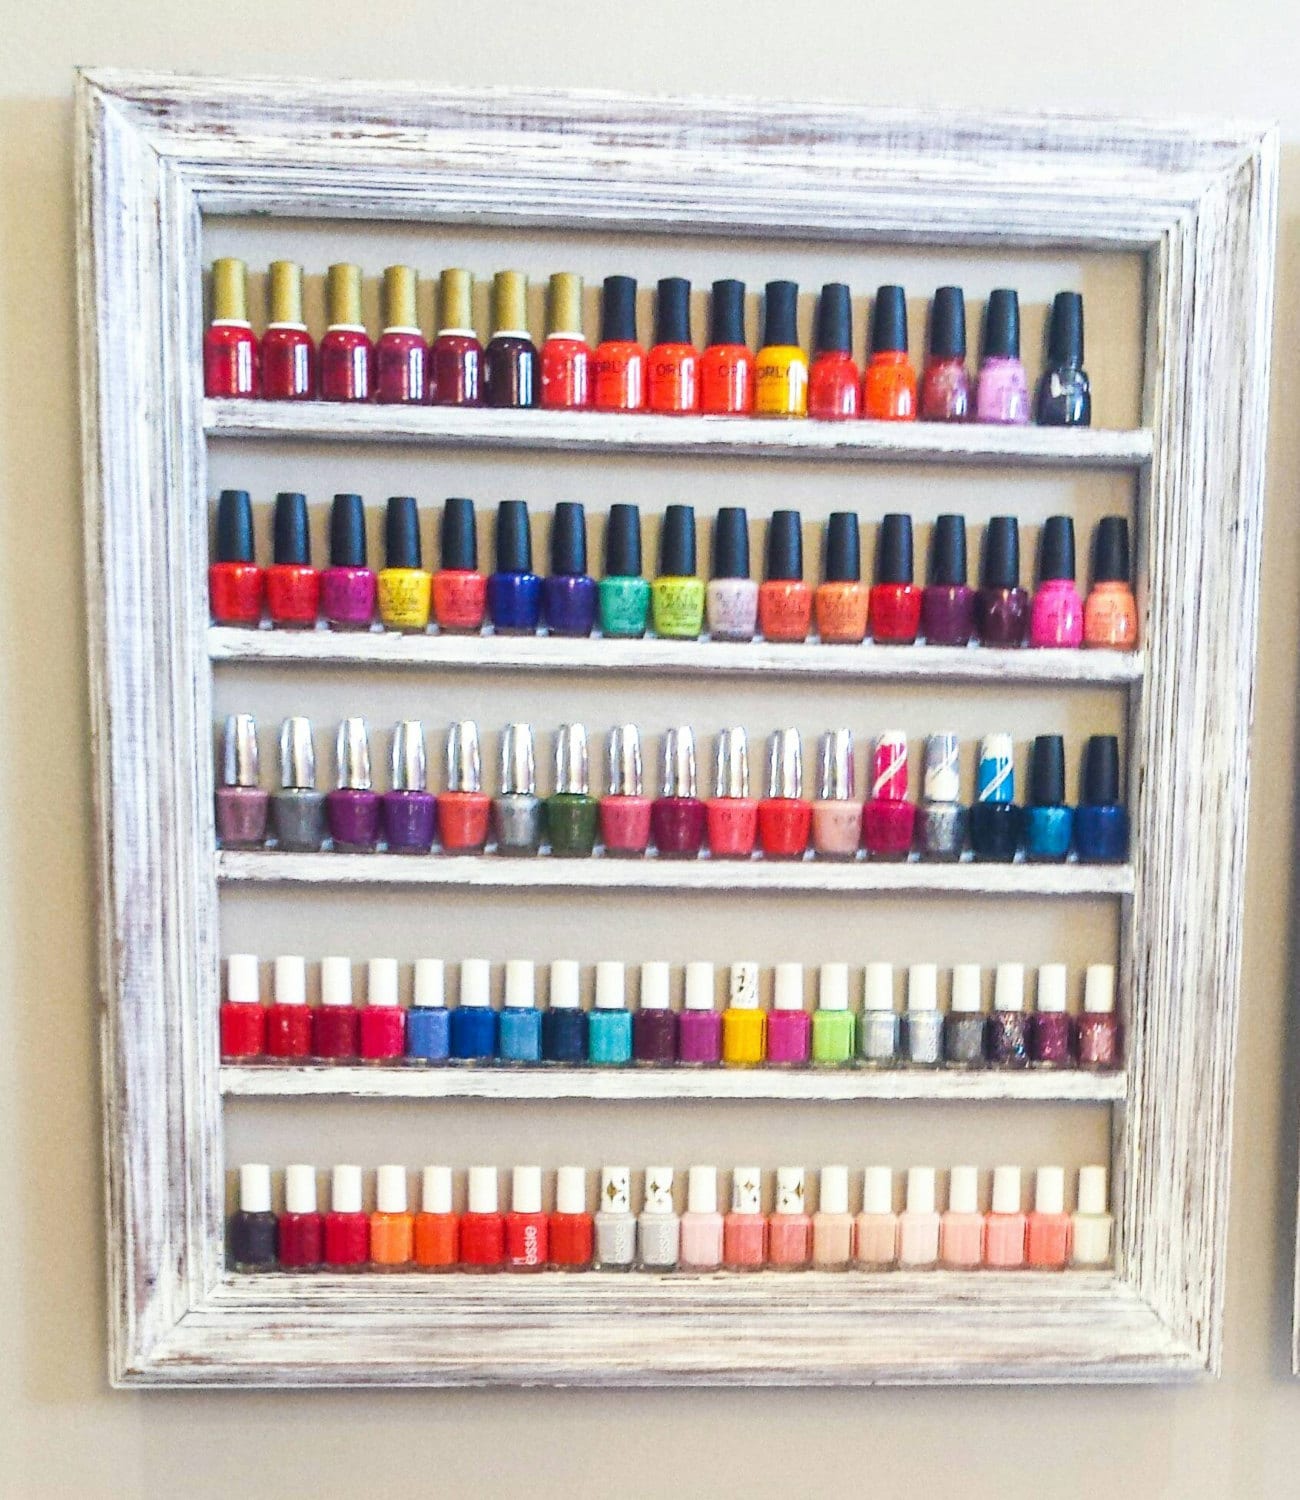 DIY Nail Polish Holder – Thrift Store Upcycle Monthly Challenge!